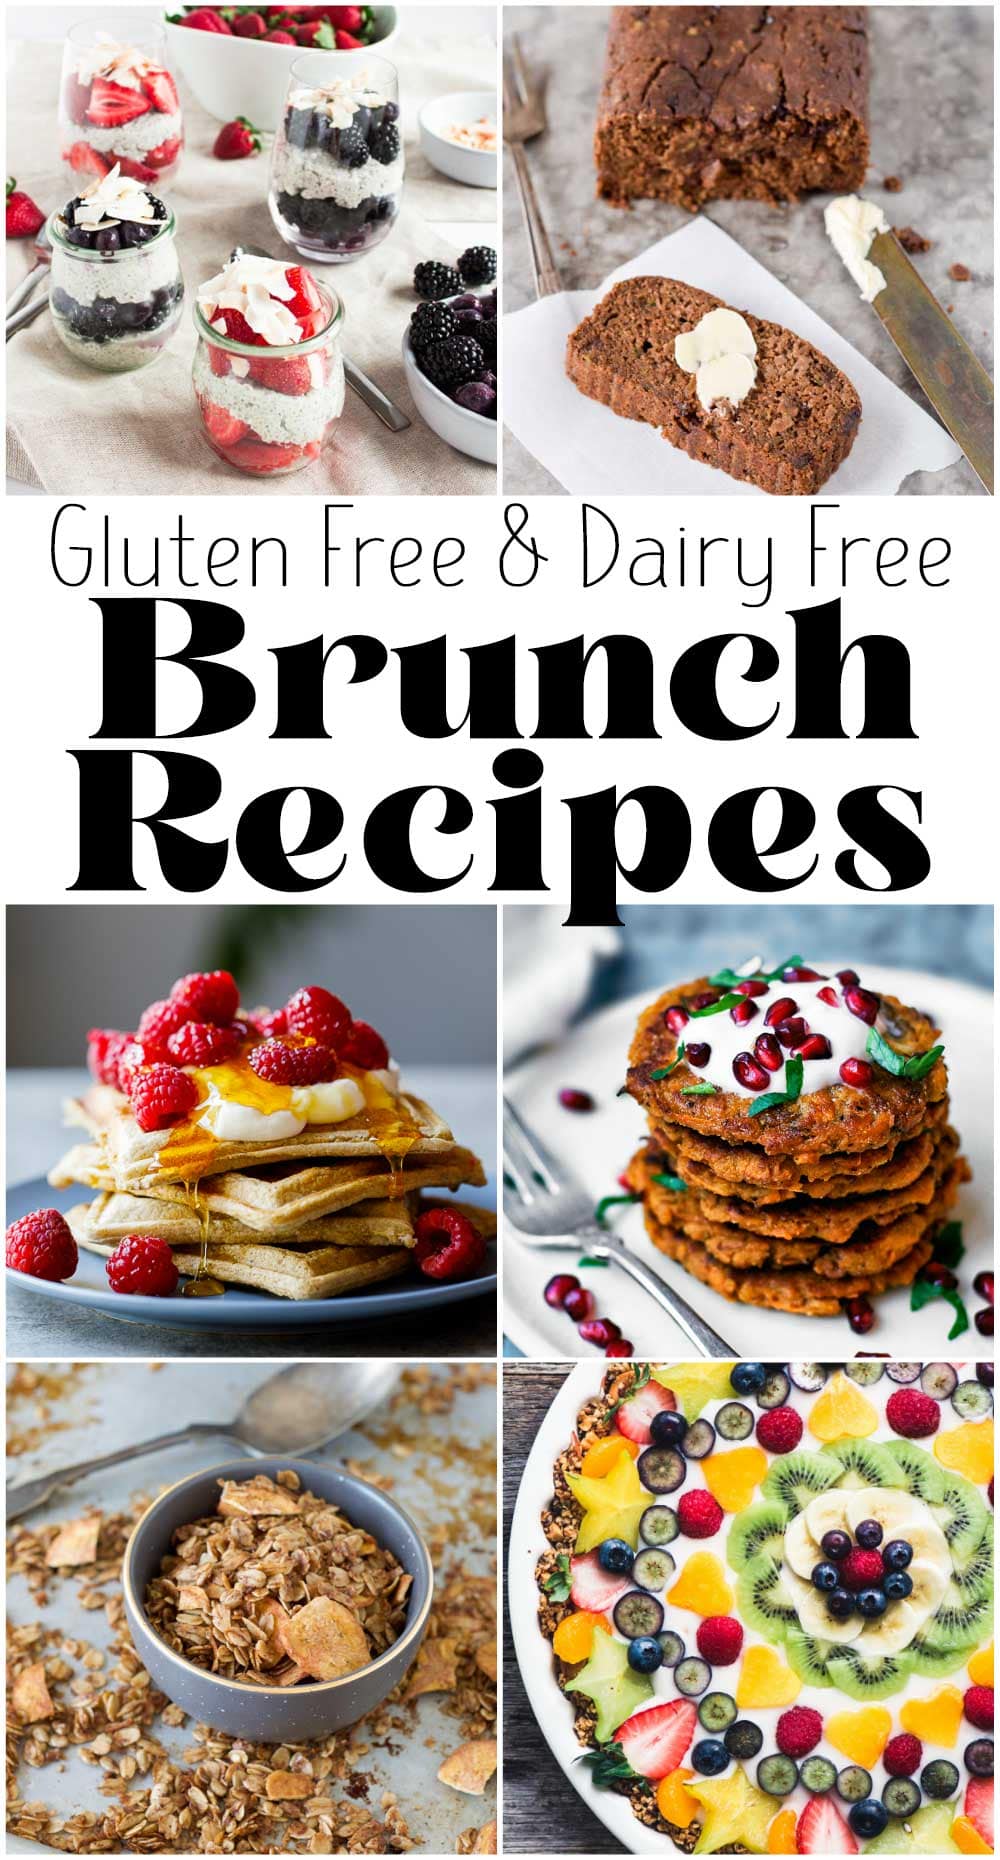 photo collage of various breakfast ad brunch recipes with text overlay that says "gluten free and dairy free brunch recipes".